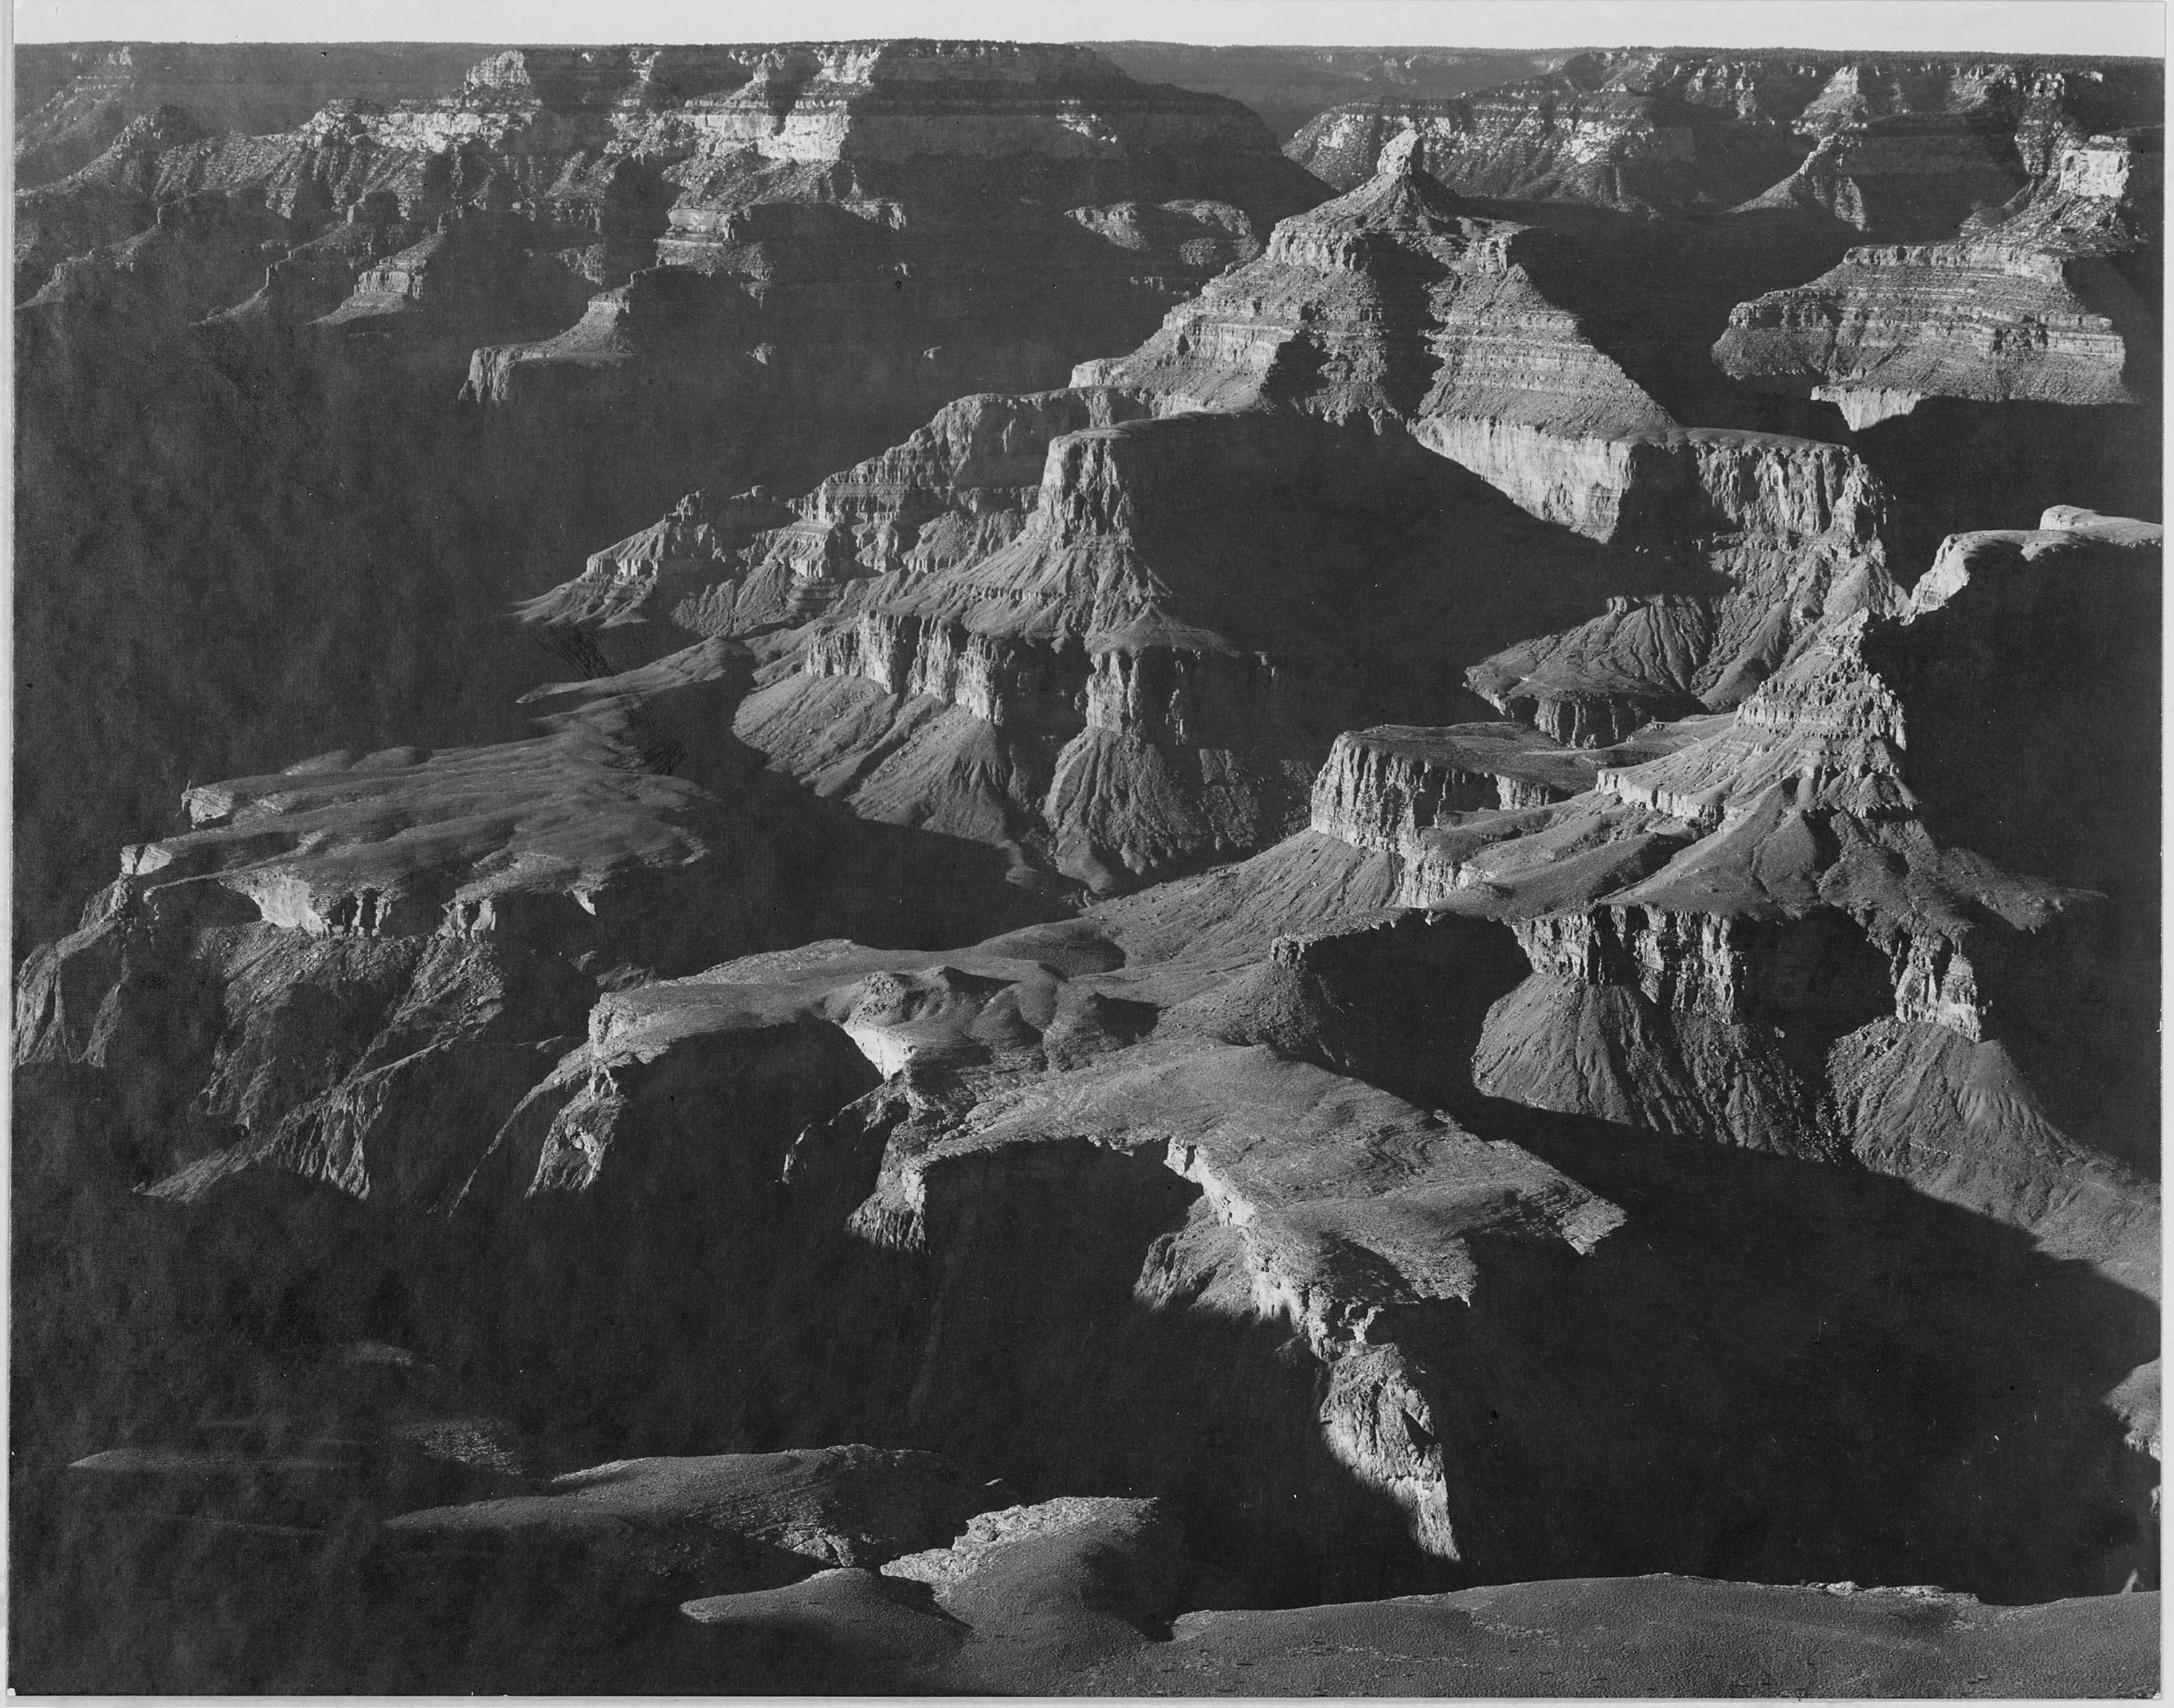 Ansel Adams - National Archives 79-AA-F07